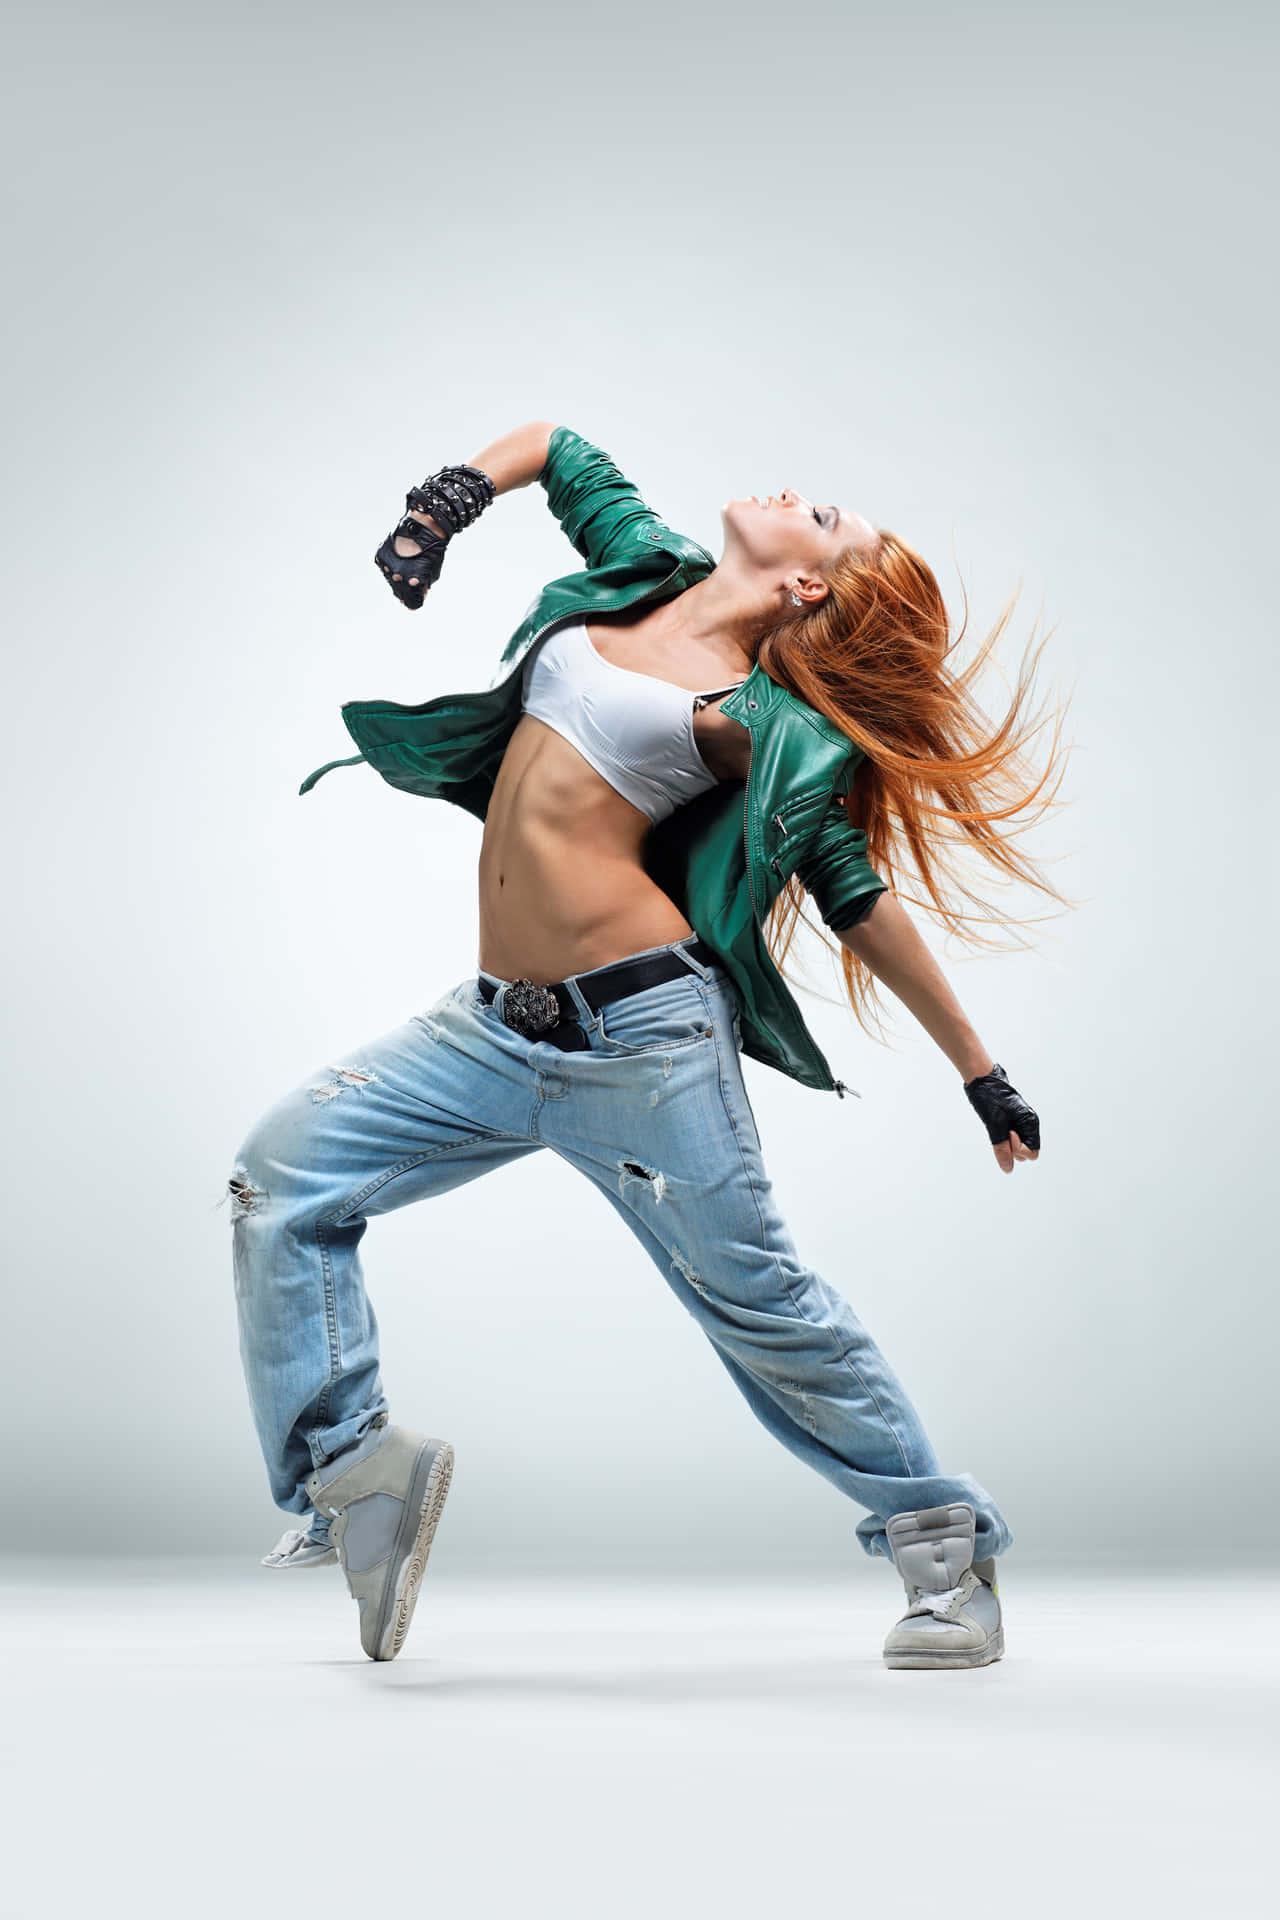 A Woman In Jeans And A Green Jacket Is Dancing